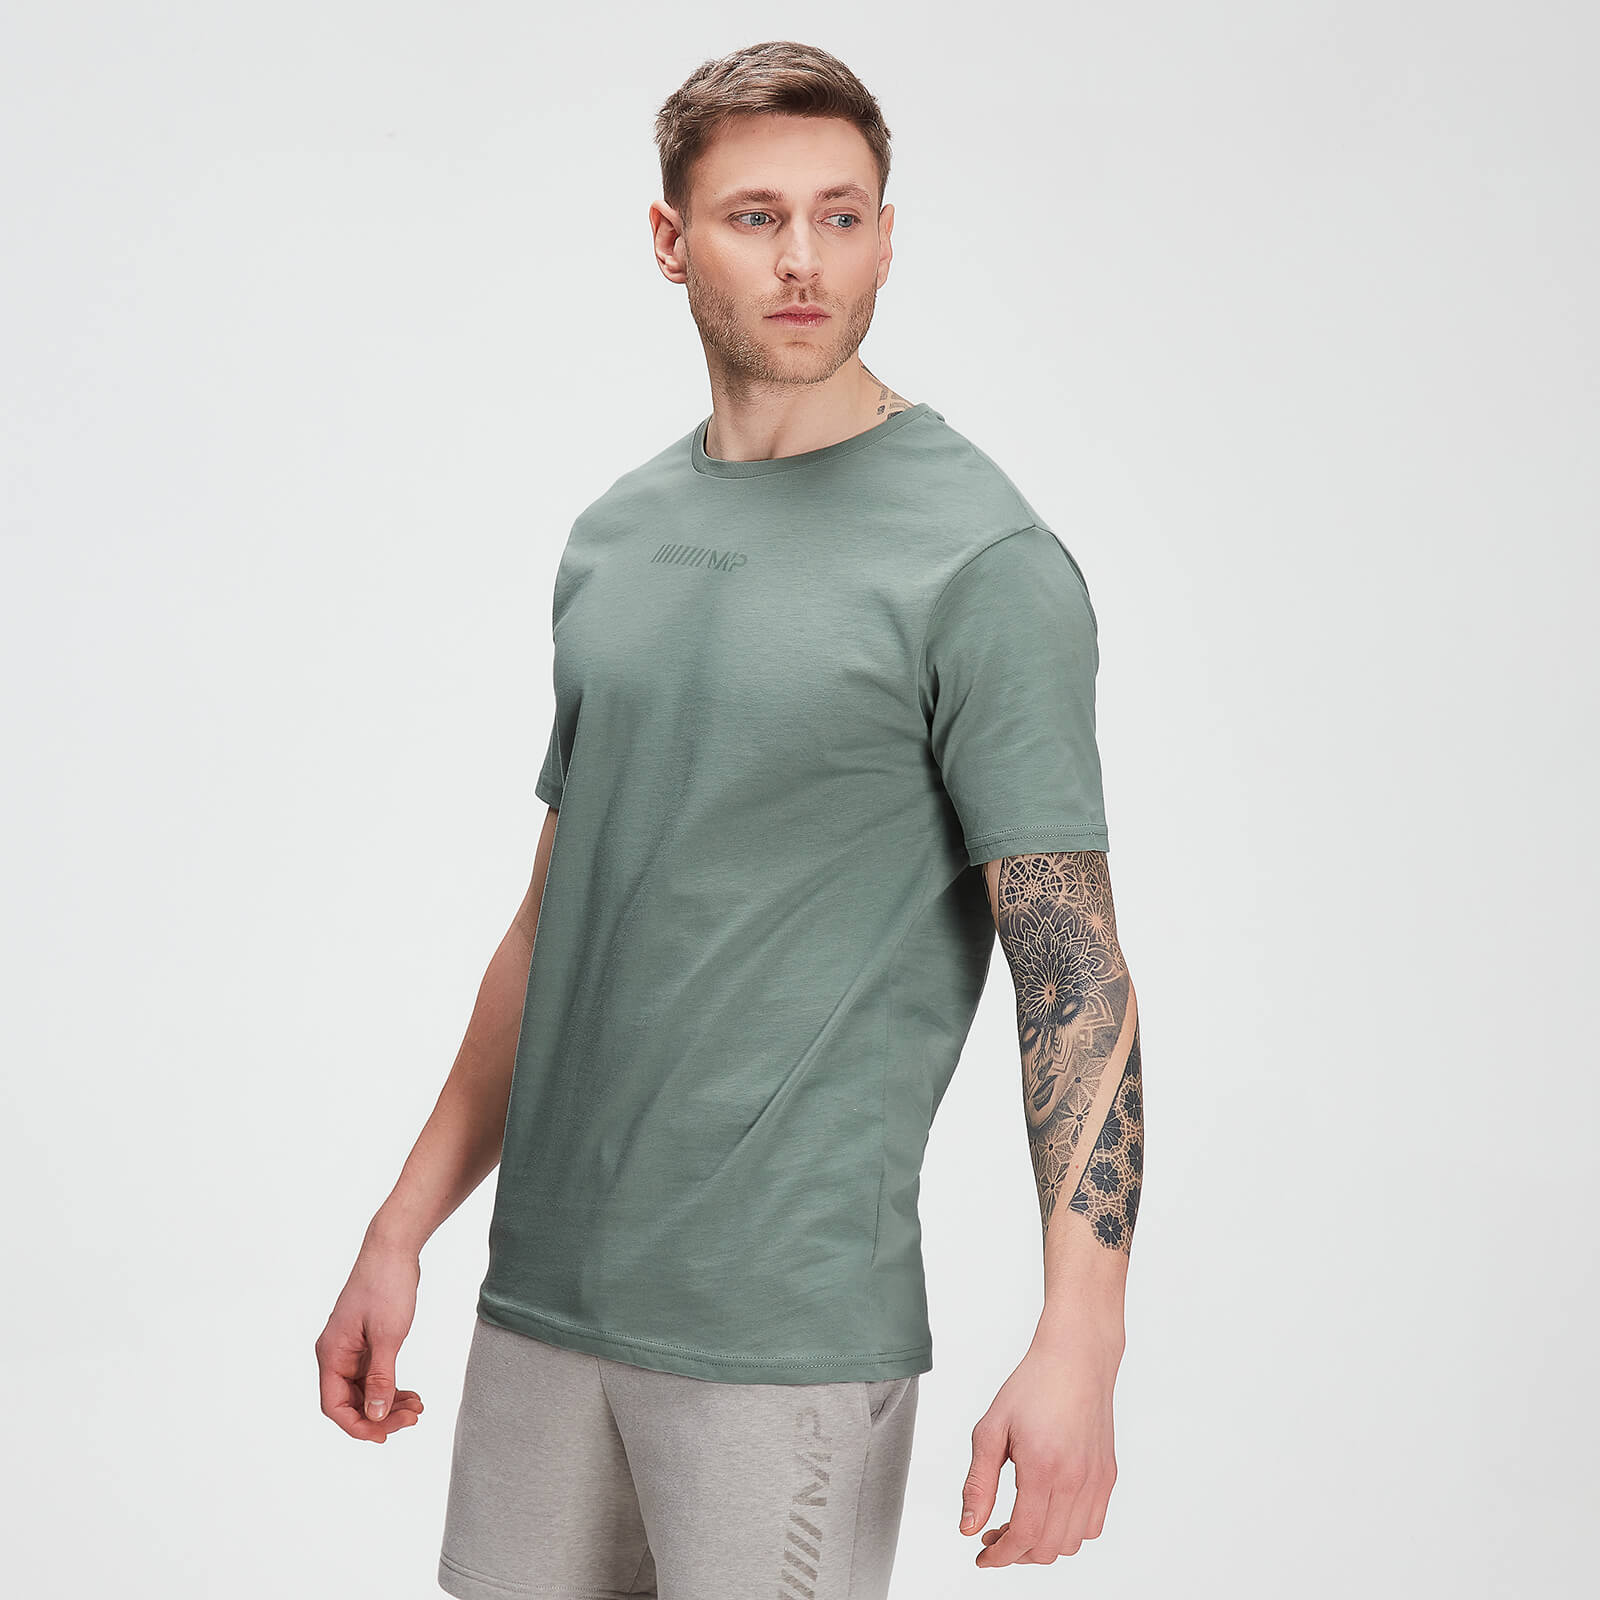 Mp Men's Tonal Graphic Short Sleeve T-shirt – Washed Green - S